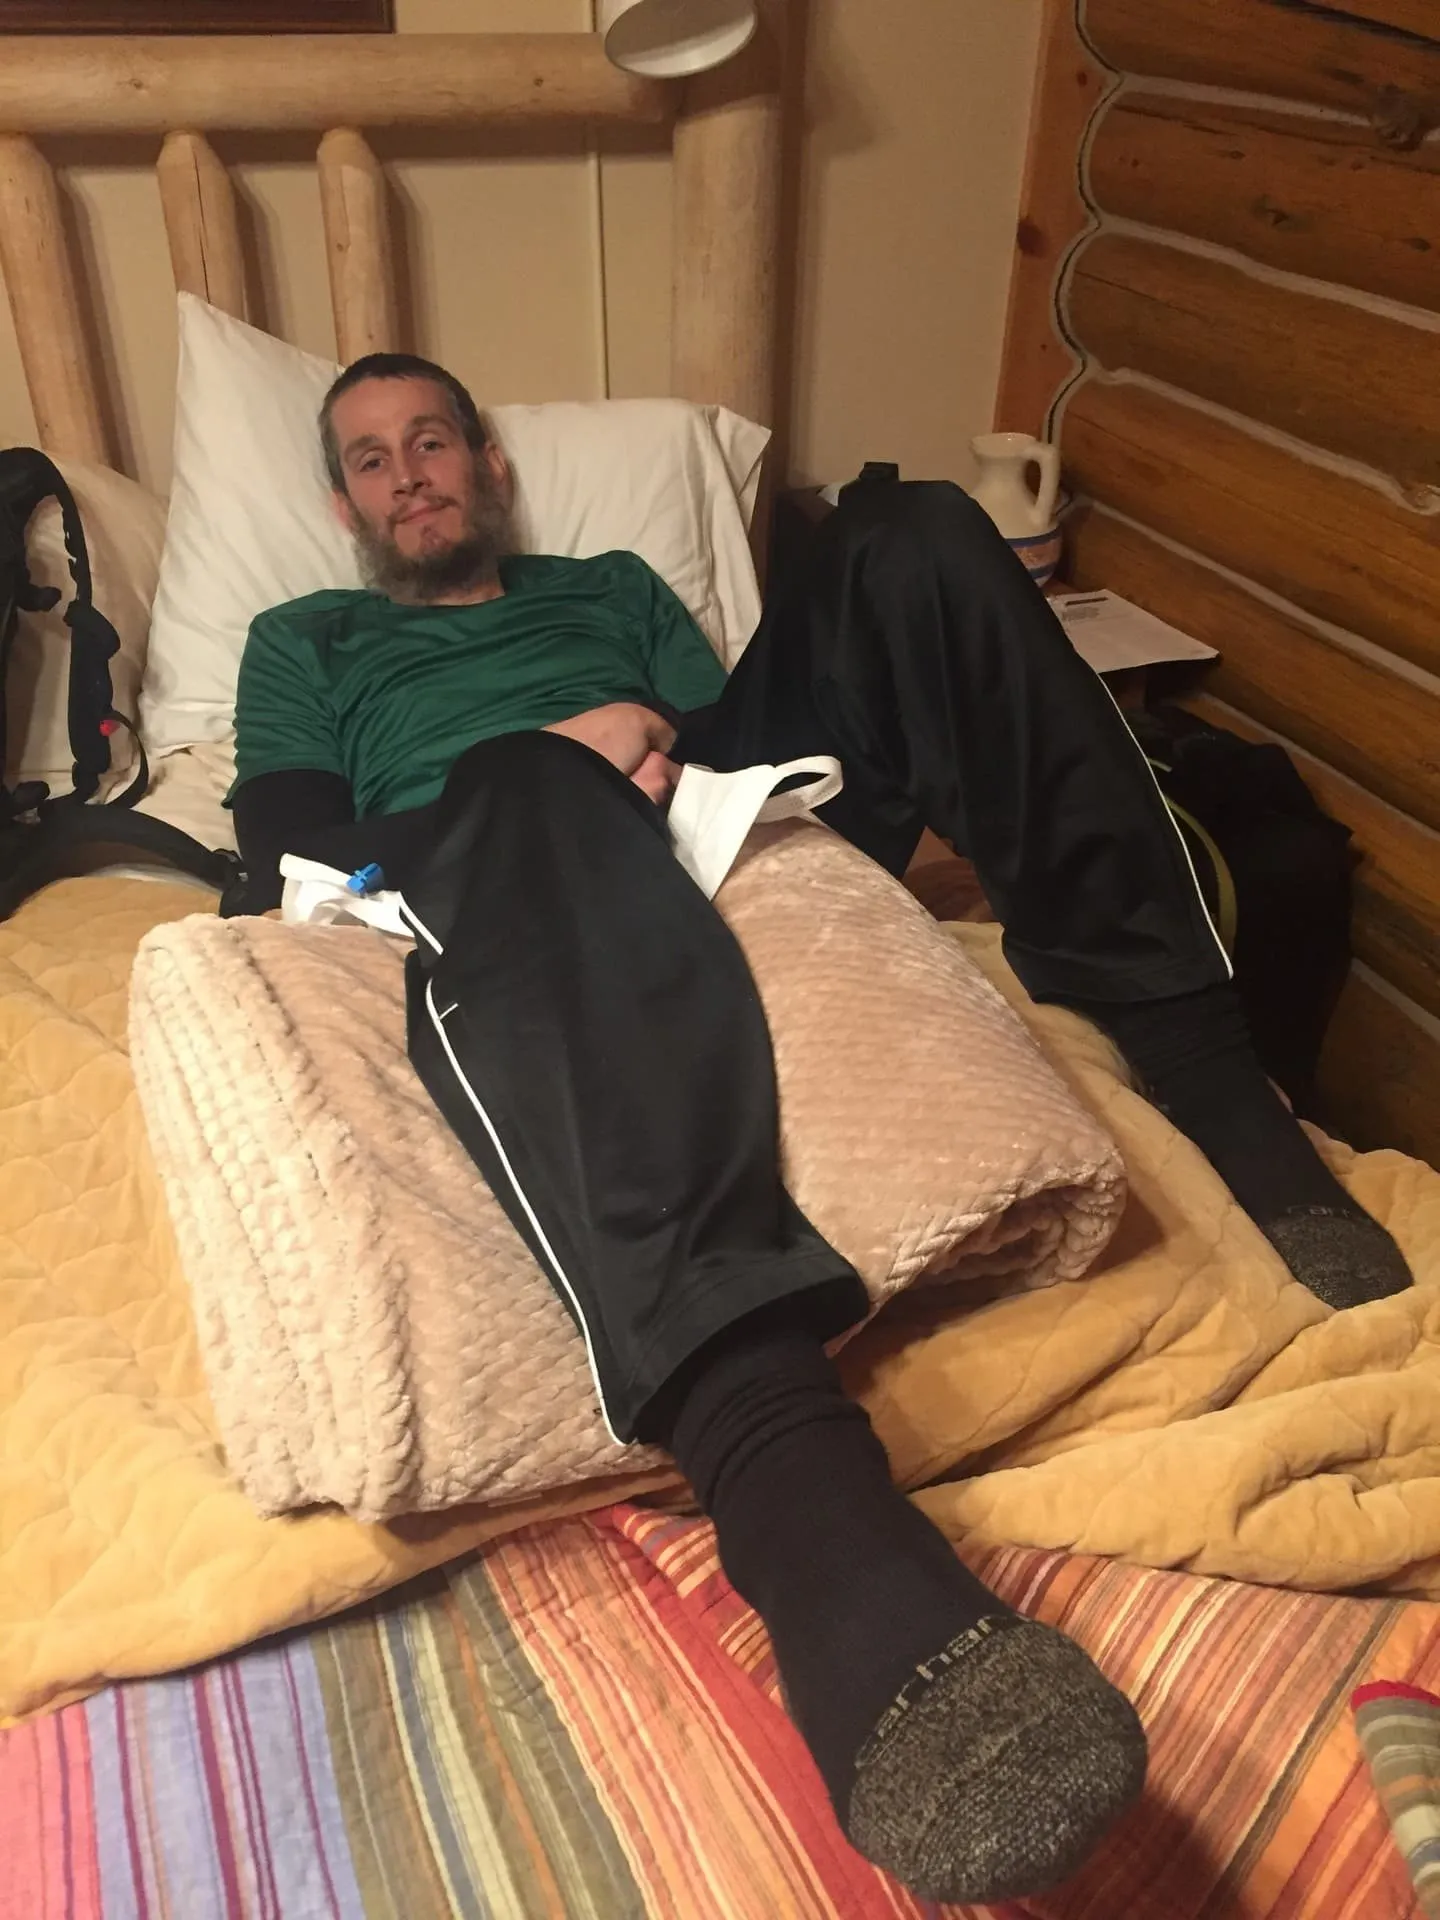 Keith trying to relax in bed after tearing his ACL while skiing